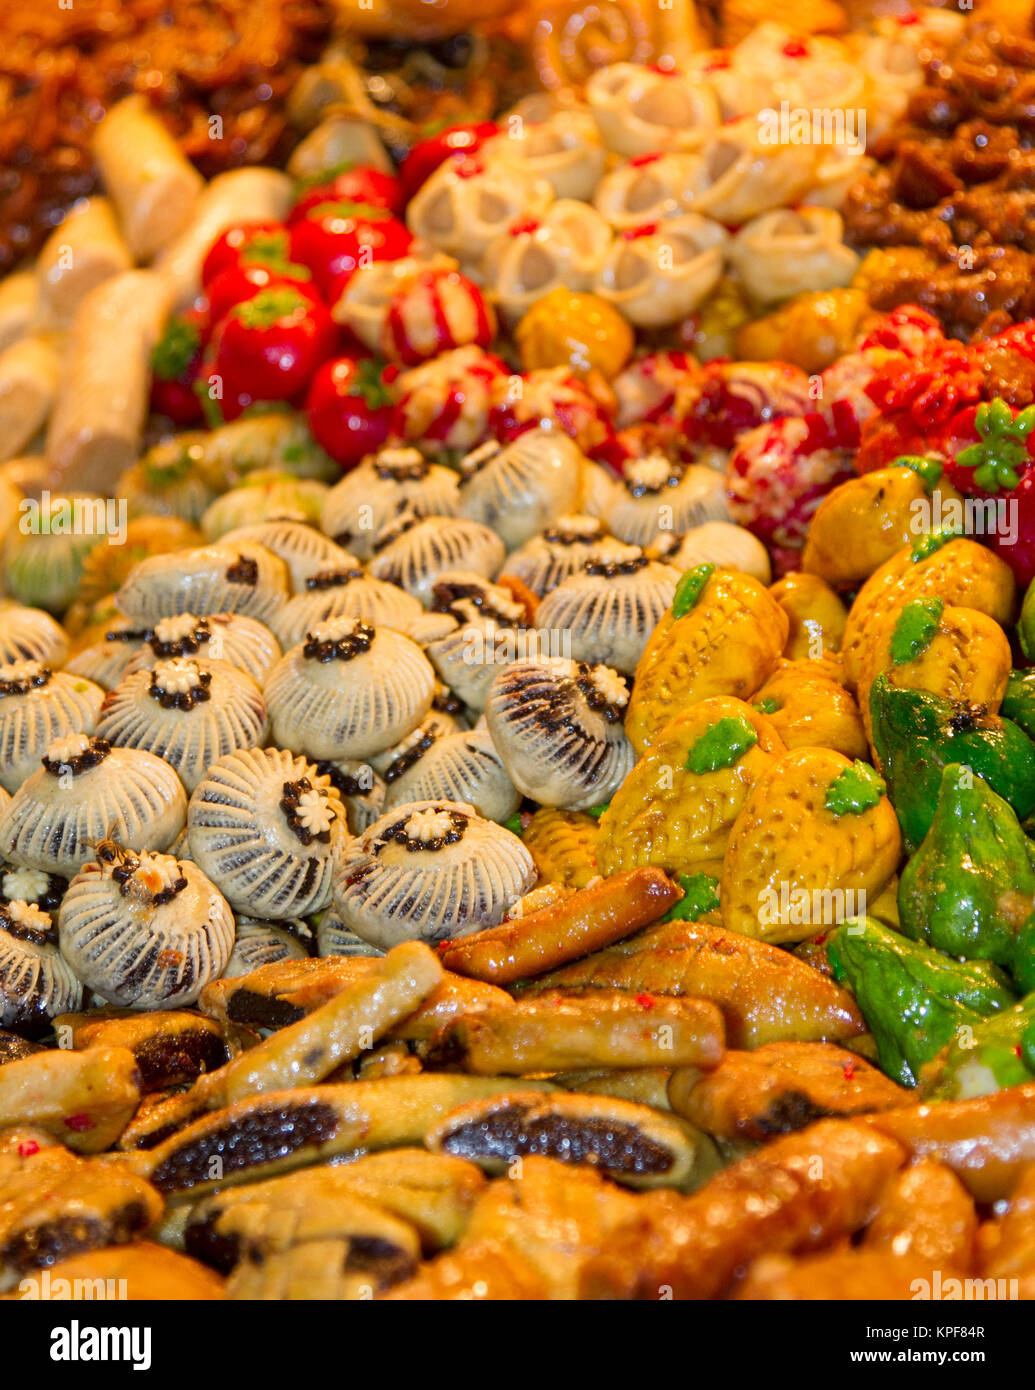 Traditional cakes for sale in Moroccan market Stock Photo